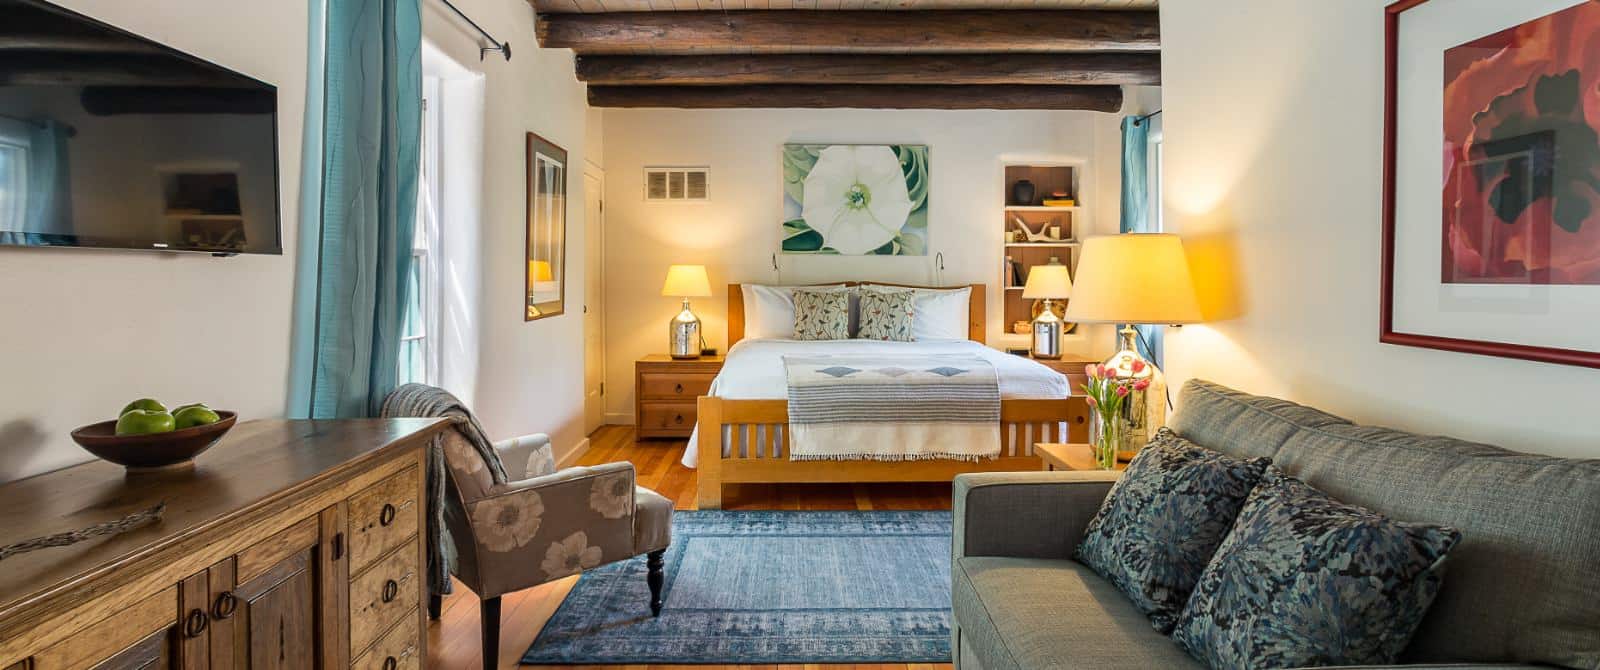 Tastefully decorated bedroom with wooden ceiling beams, plank flooring and a king bed with Georgia O'Keefe prints on the walls.